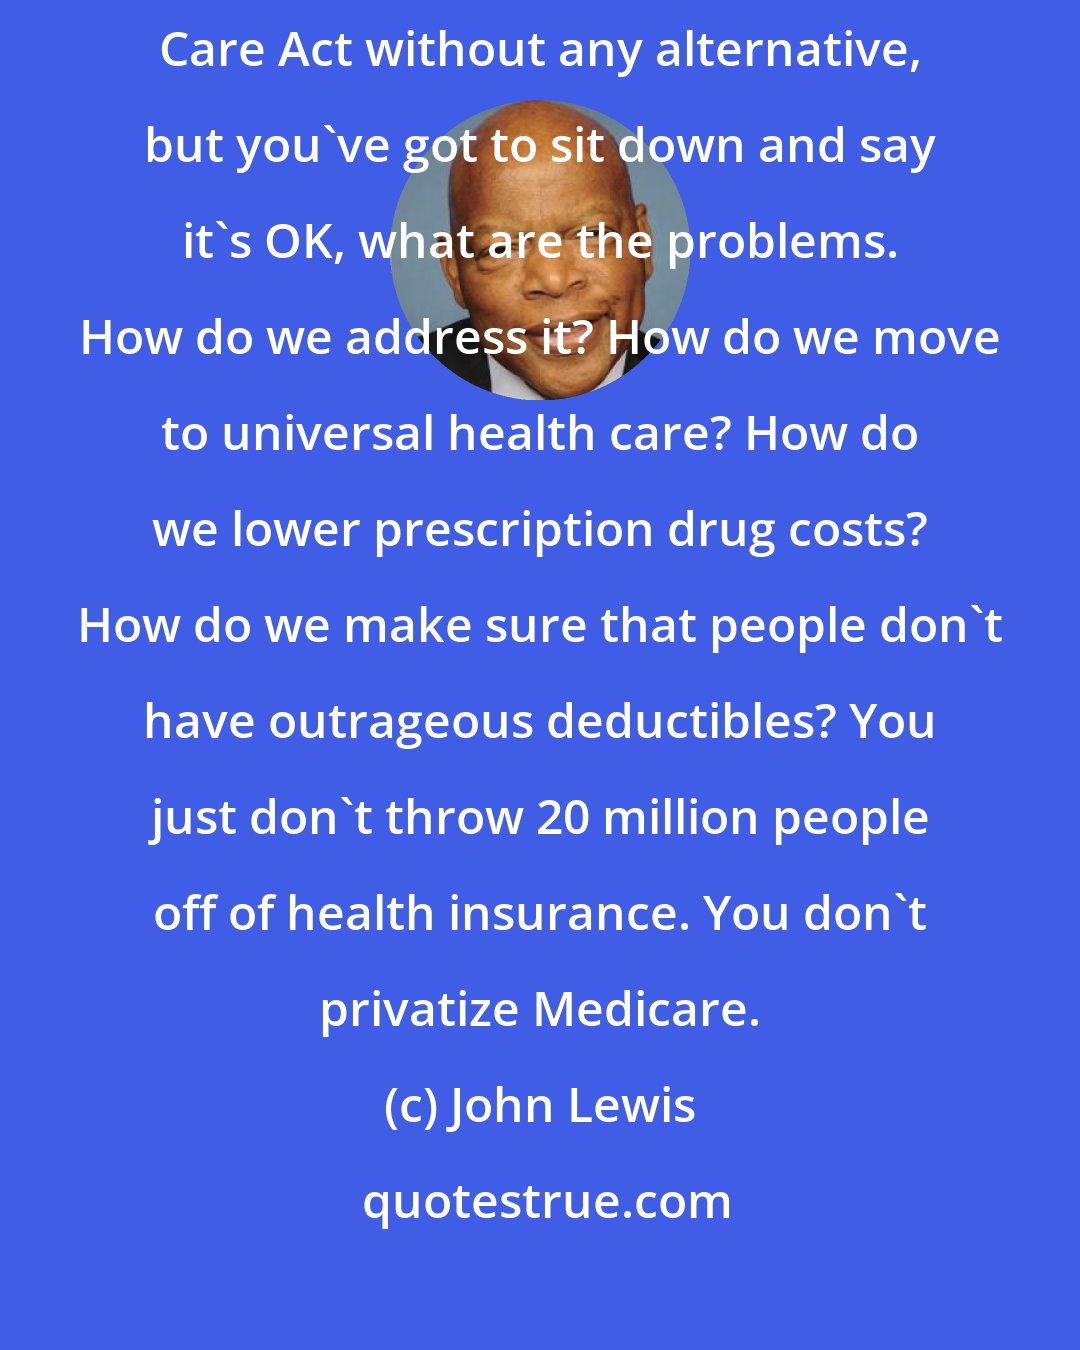 John Lewis: What sensible people have got to do is not simply repeal the Affordable Care Act without any alternative, but you've got to sit down and say it's OK, what are the problems. How do we address it? How do we move to universal health care? How do we lower prescription drug costs? How do we make sure that people don't have outrageous deductibles? You just don't throw 20 million people off of health insurance. You don't privatize Medicare.